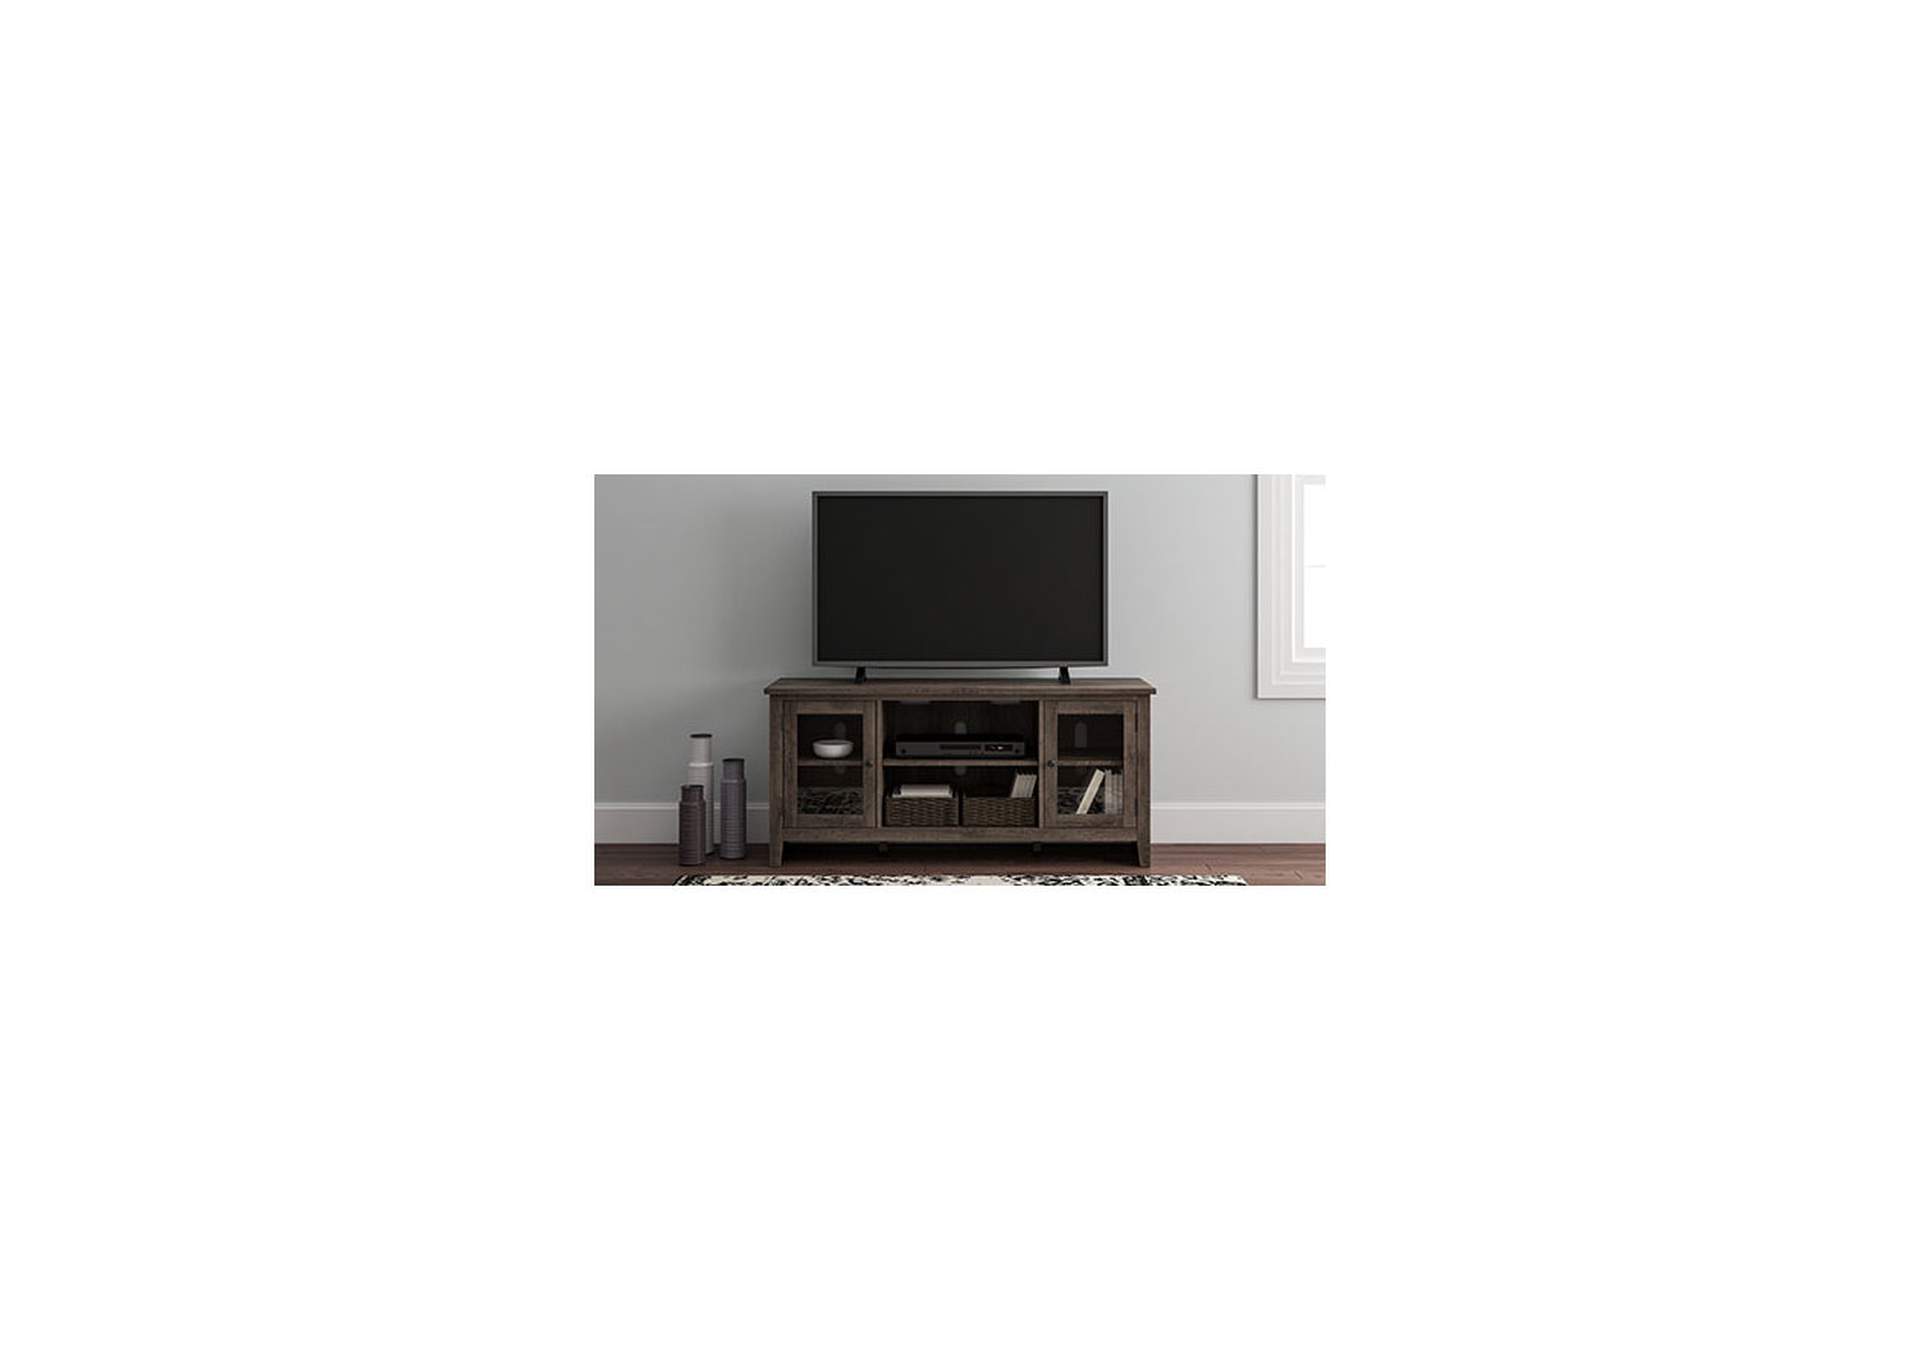 Arlenbry 60" TV Stand,Direct To Consumer Express